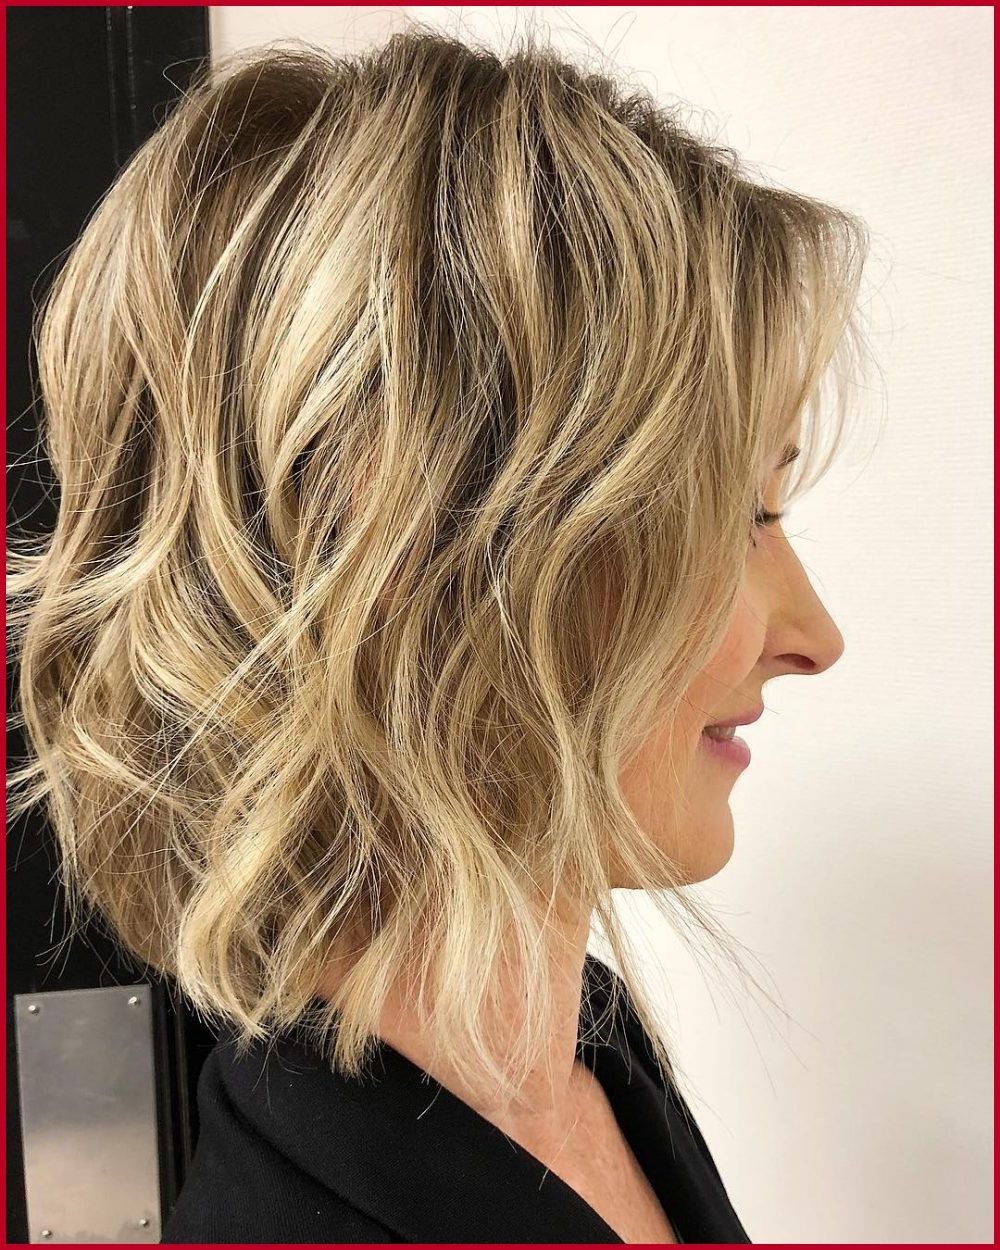 Short Easy Care Hairstyles For Fine Hair 410677 43 Perfect Short Intended For Short Easy Hairstyles For Fine Hair (Photo 8 of 25)